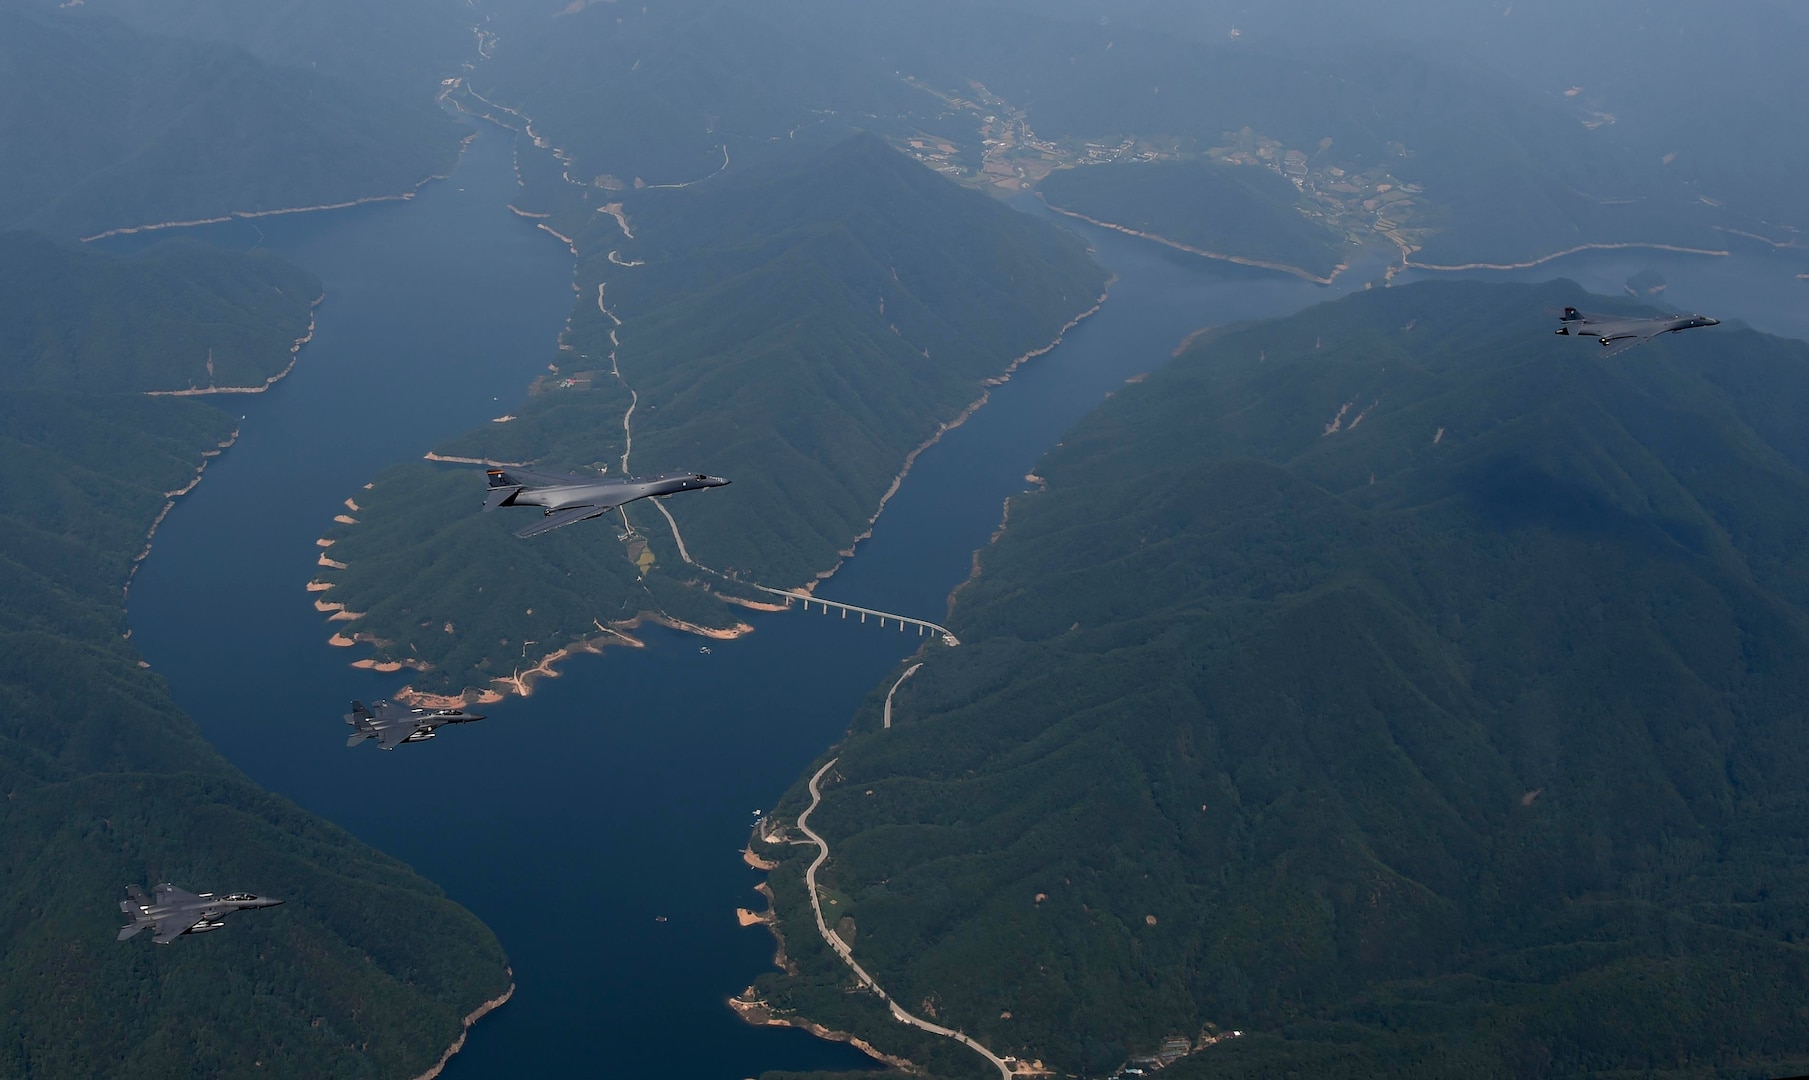 Two U.S. Air Force B-1B Lancers deployed to Andersen Air Base, Guam, and two F-15K Slam Eagles assigned to Daegu Air Base, Republic of Korea, fly over ROK skies Sept. 21, 2016. The flight was the closest a B-1 has ever flown to the border between the ROK and North Korea. The B-1 is the backbone of the U.S. long-range bomber mission and is capable of carrying the largest payload of both guided and unguided weapons in the Air Force inventory. (Republic of Korea air force photo by Chief Master Sgt. Kim, Kyeong Ryul)